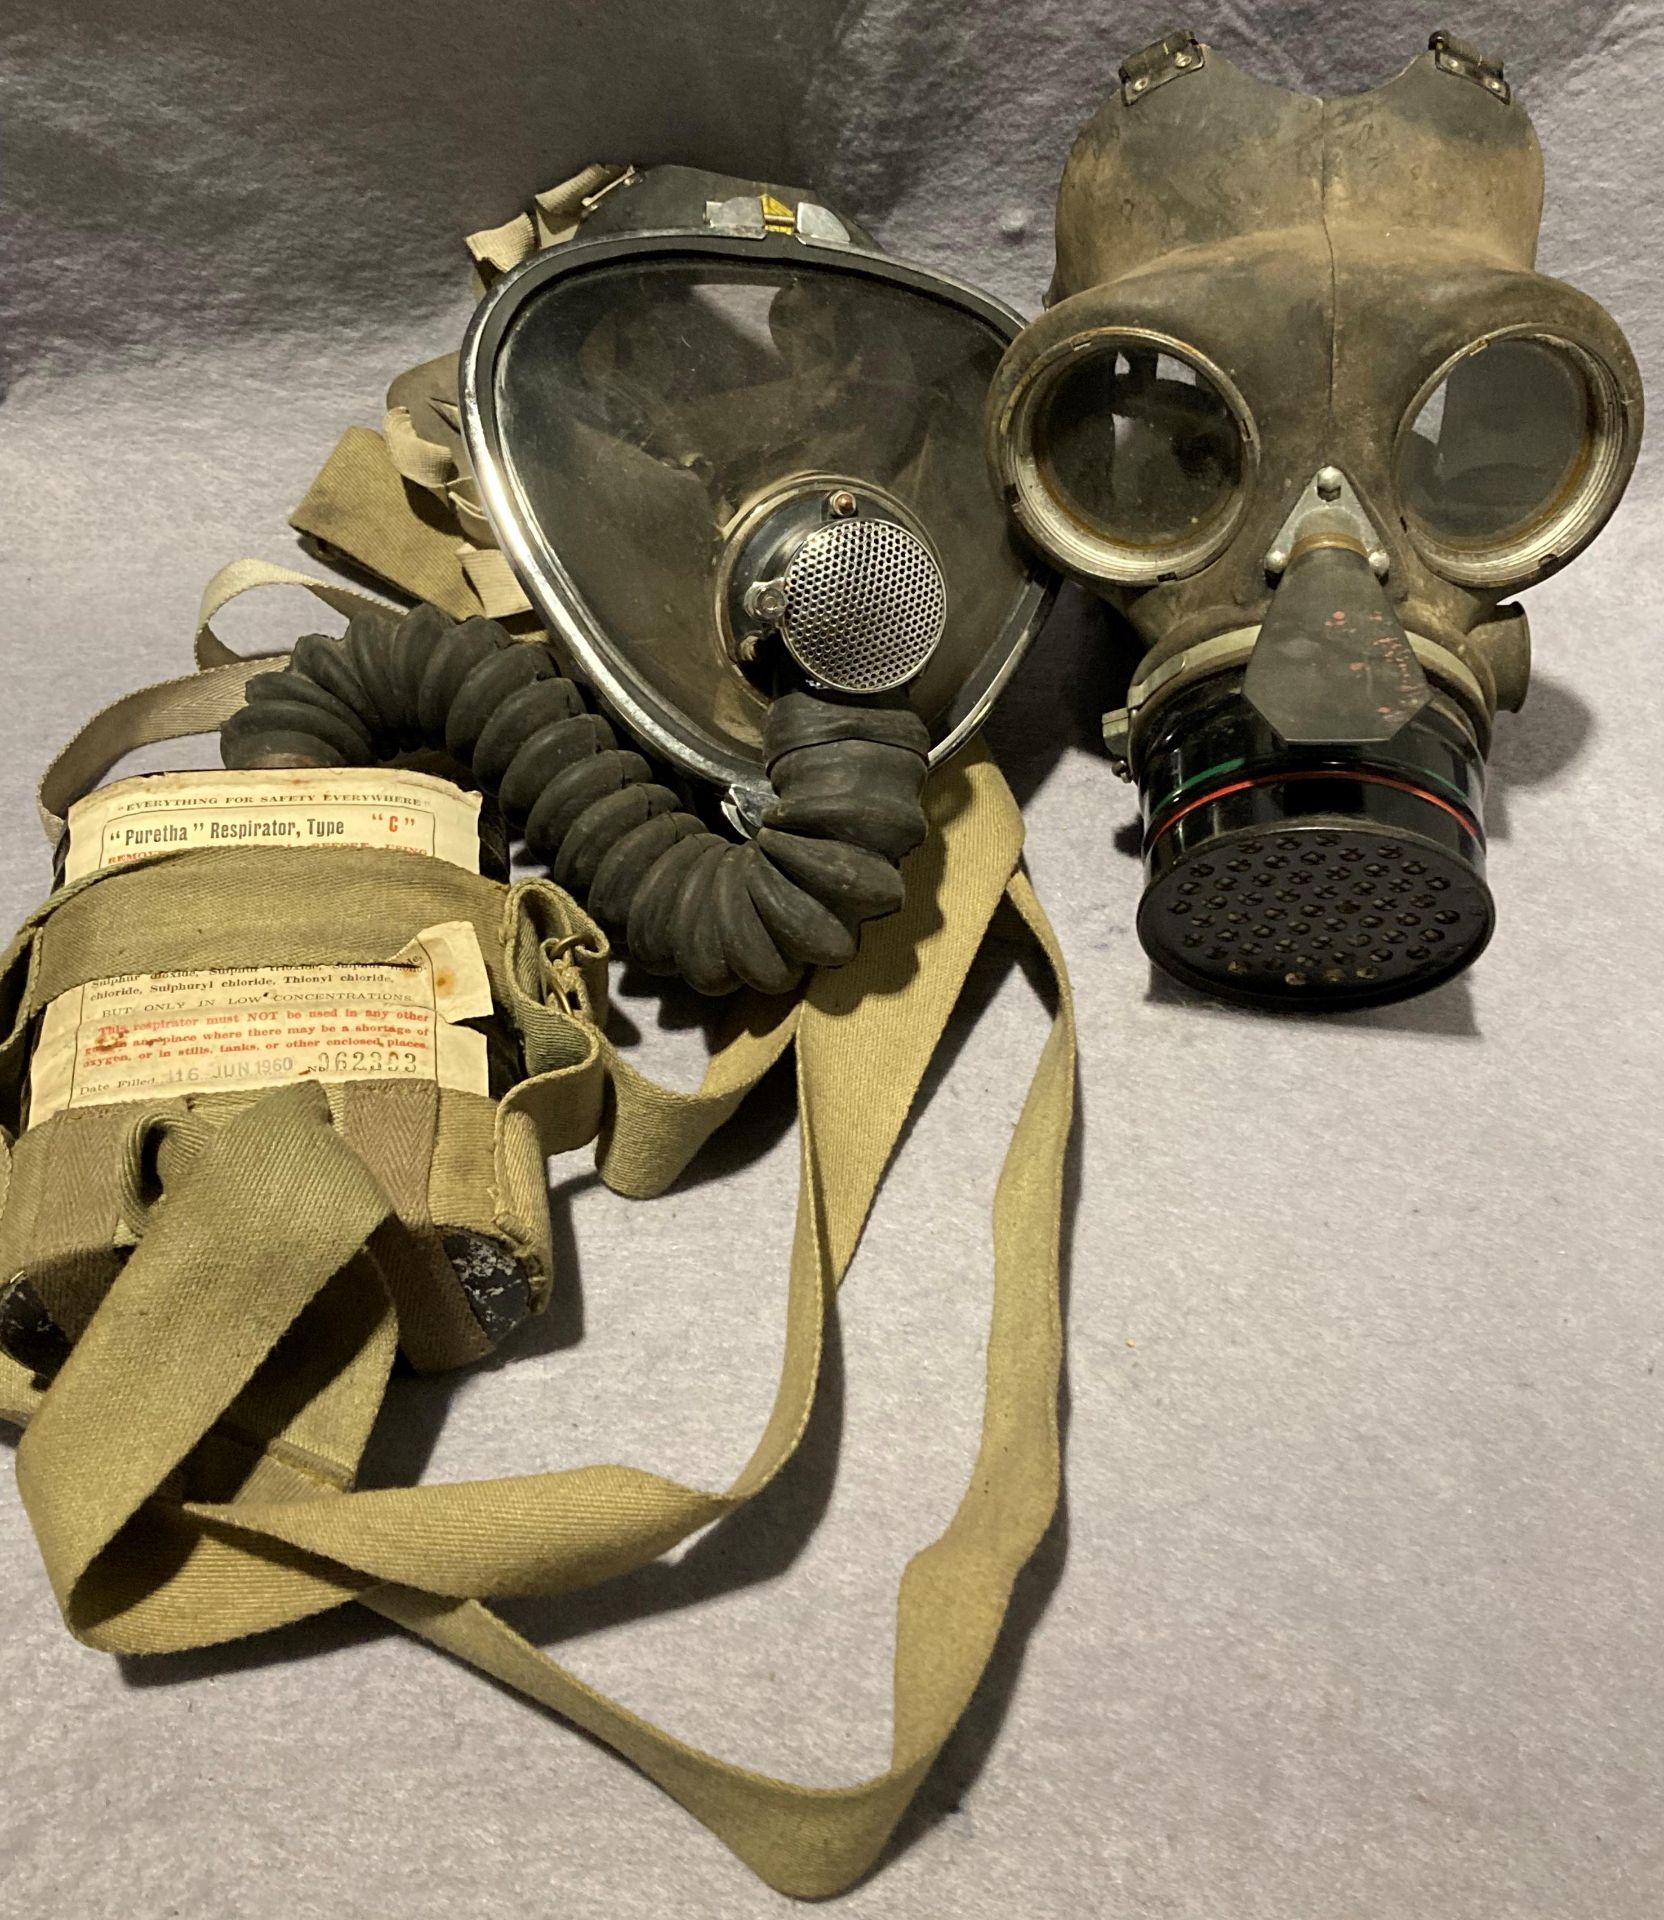 Vintage Puretha type C respirator face mask dated 16 Jun 1960 and a British WW2 civilian duty gas